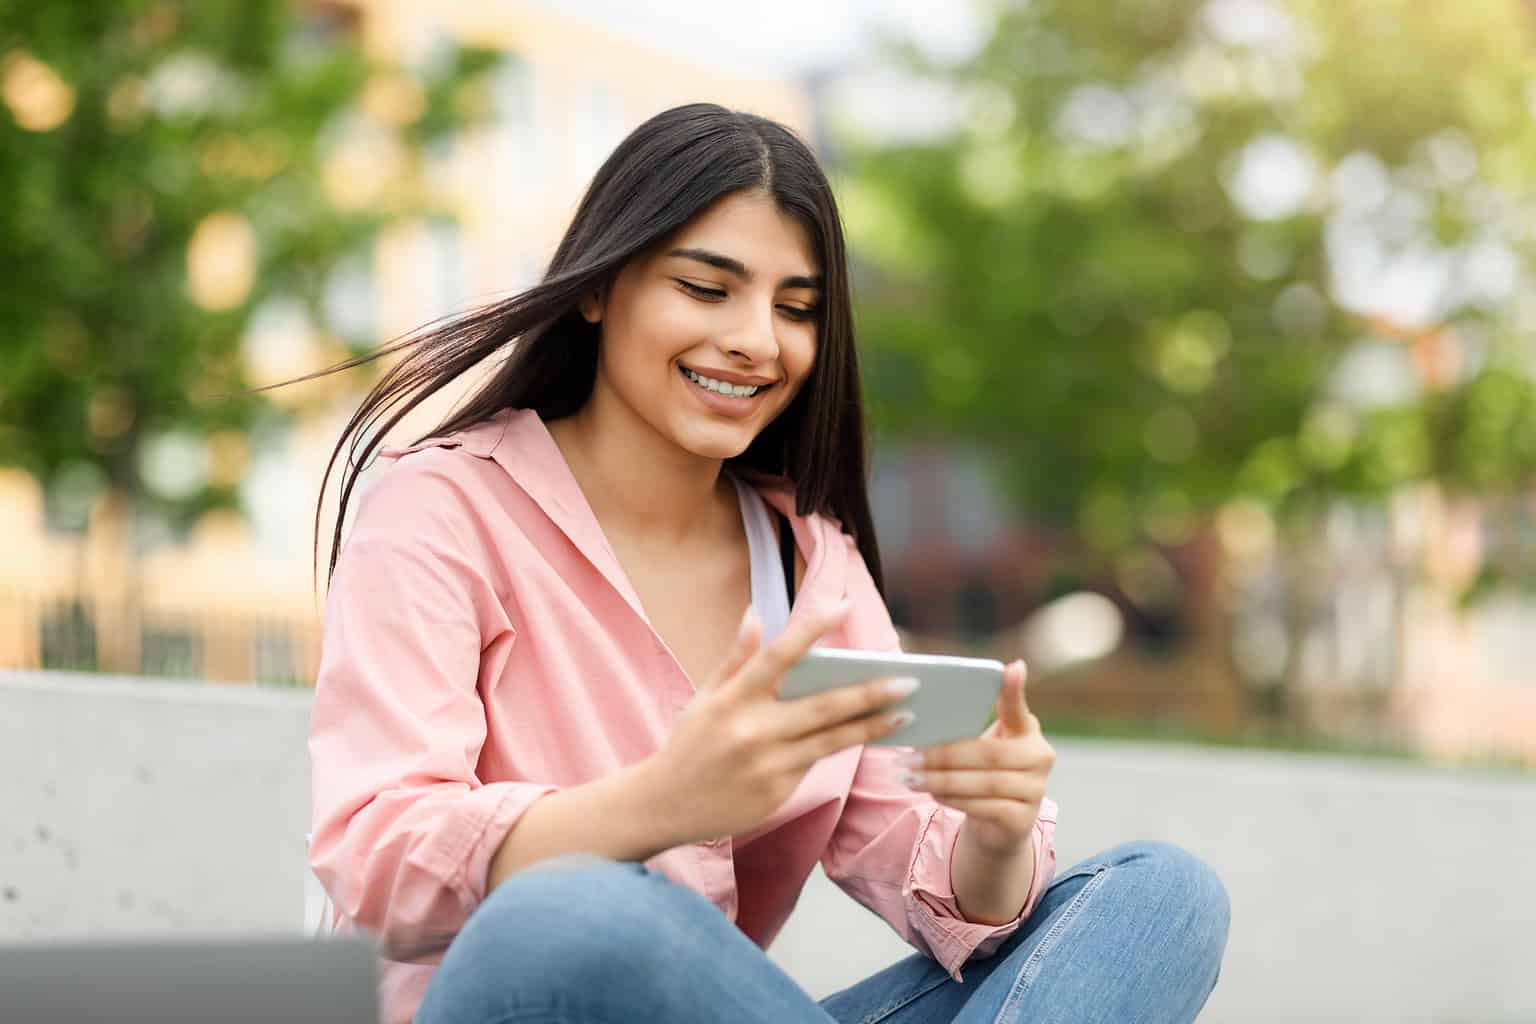 Smiling Teen Hispanic Lady Messaging Or Playing On Smartphone While Relaxing In Park Outdoors, Free Space, mychart